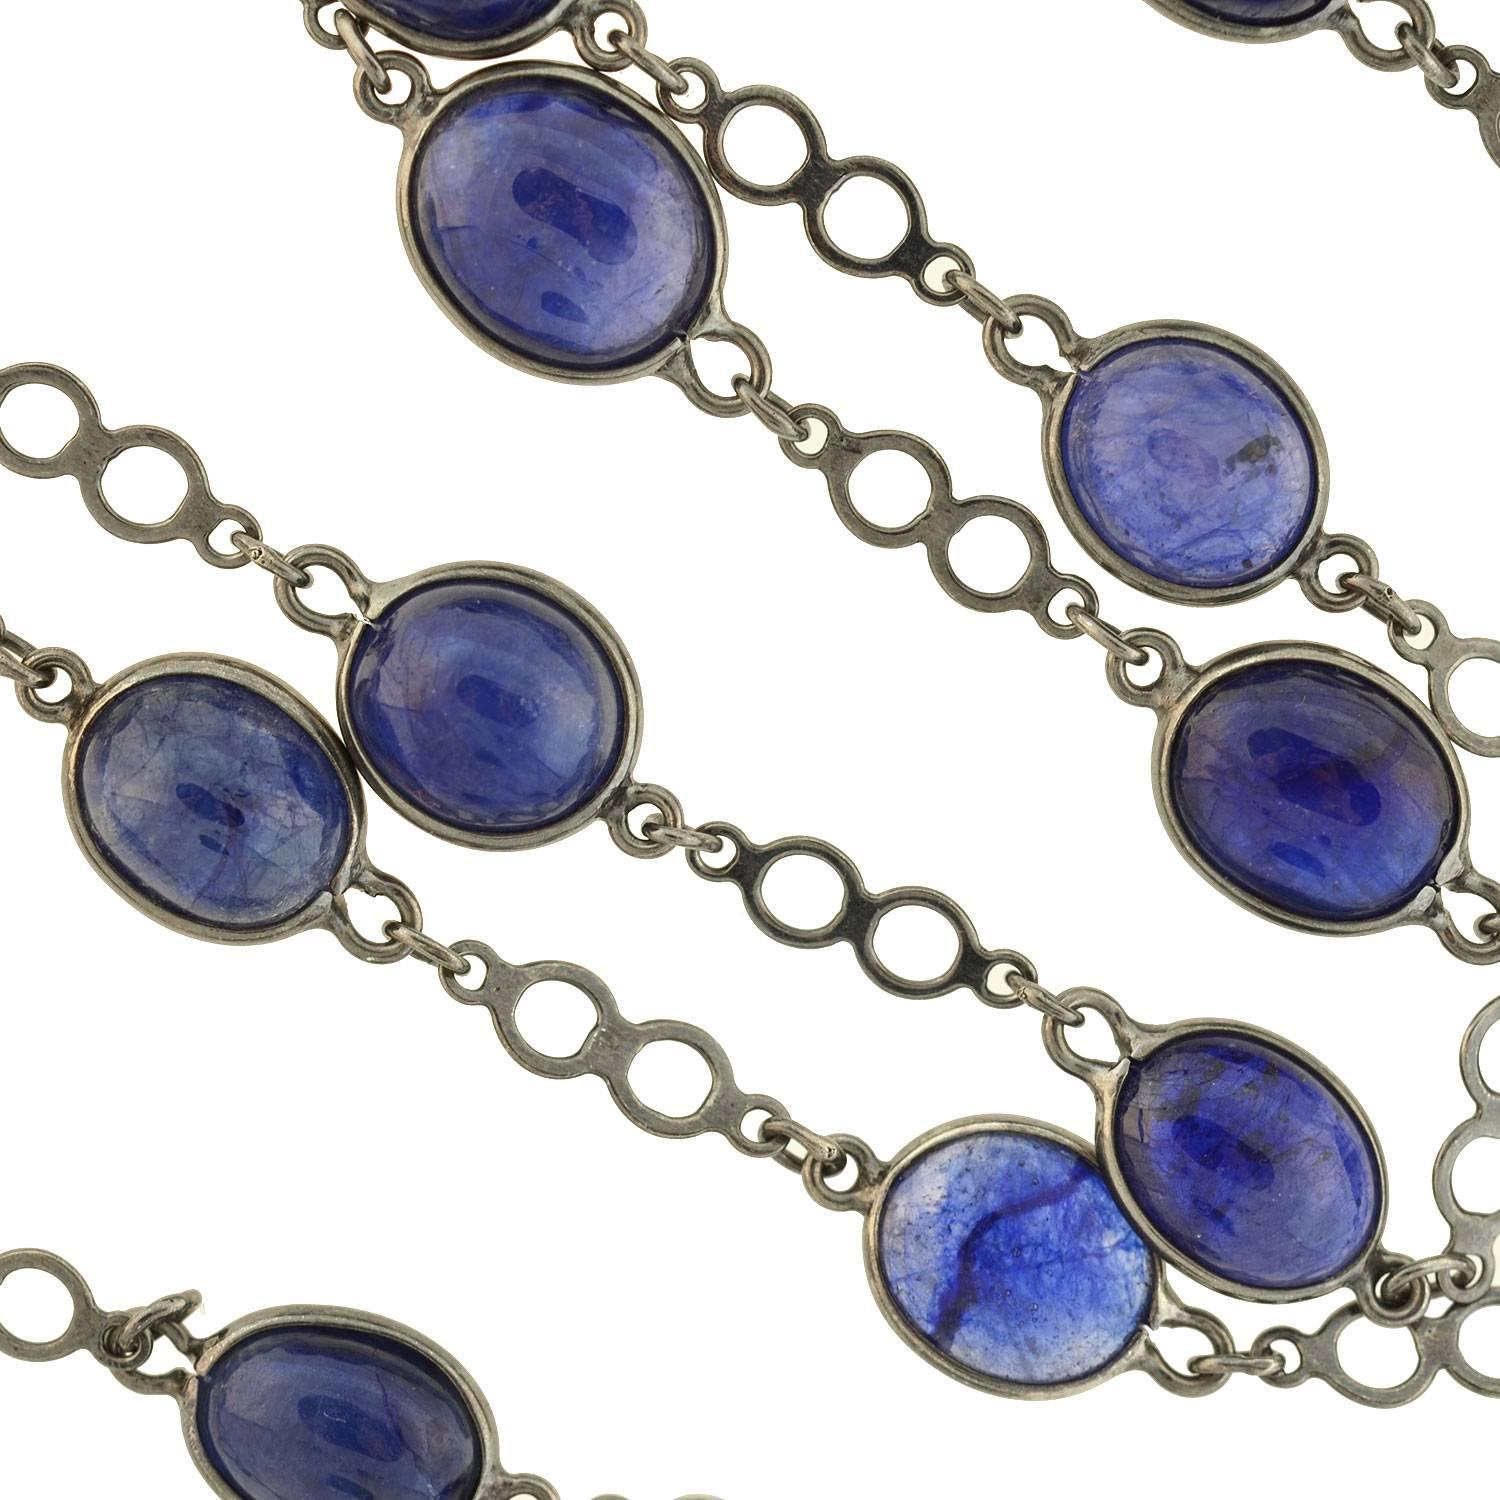 An outstanding Estate necklace with a beautiful look! This fantastic piece is crafted in blackened sterling silver and comprised of 22 mesmerizing sapphire links, each held within an open sterling bezel. The sapphire stones vary slightly in size and